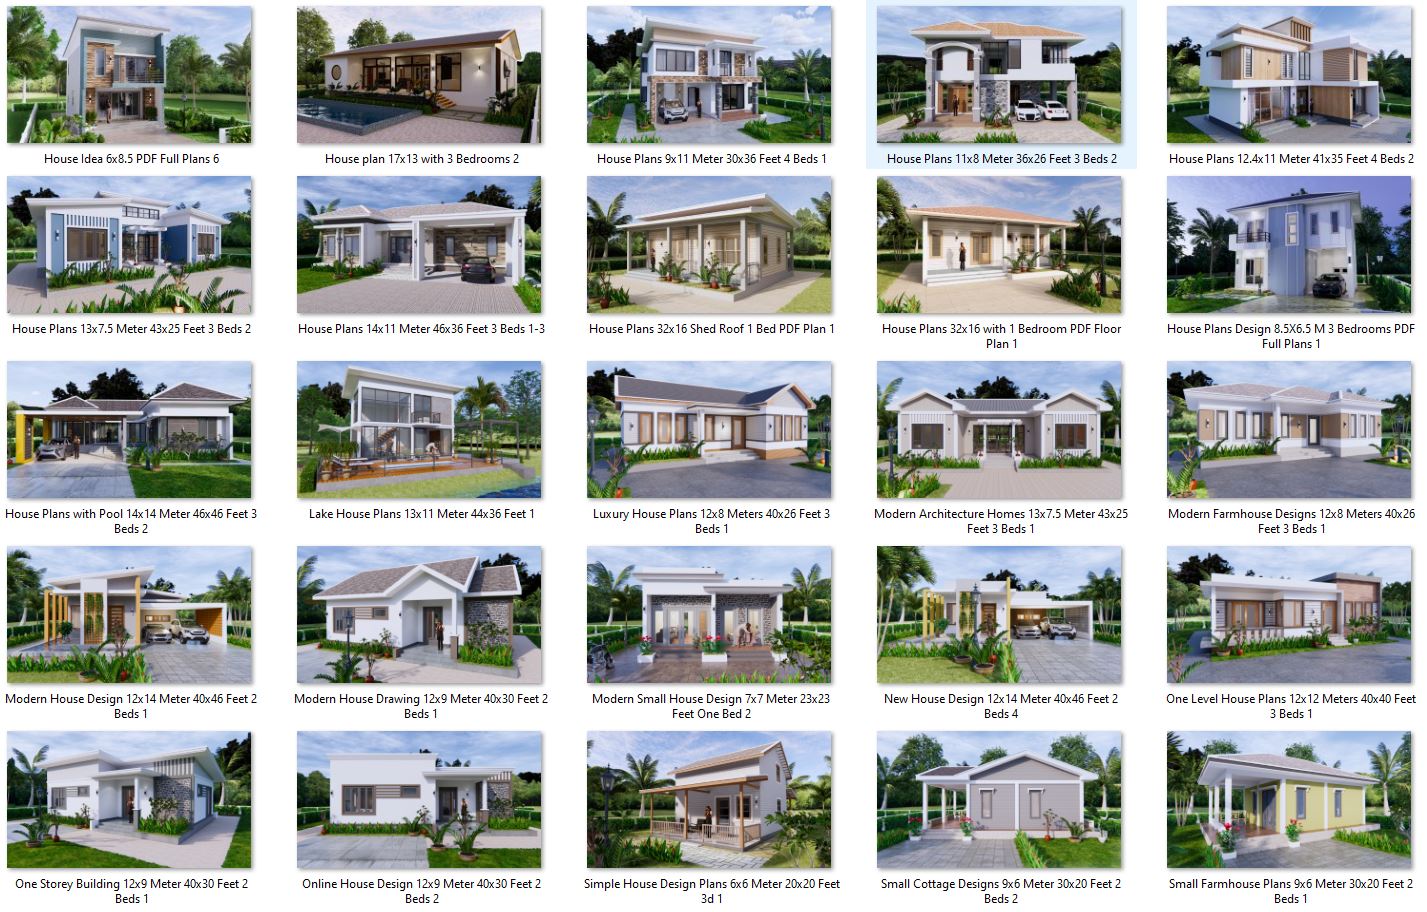 74 House Design Plans Available For Sell 02